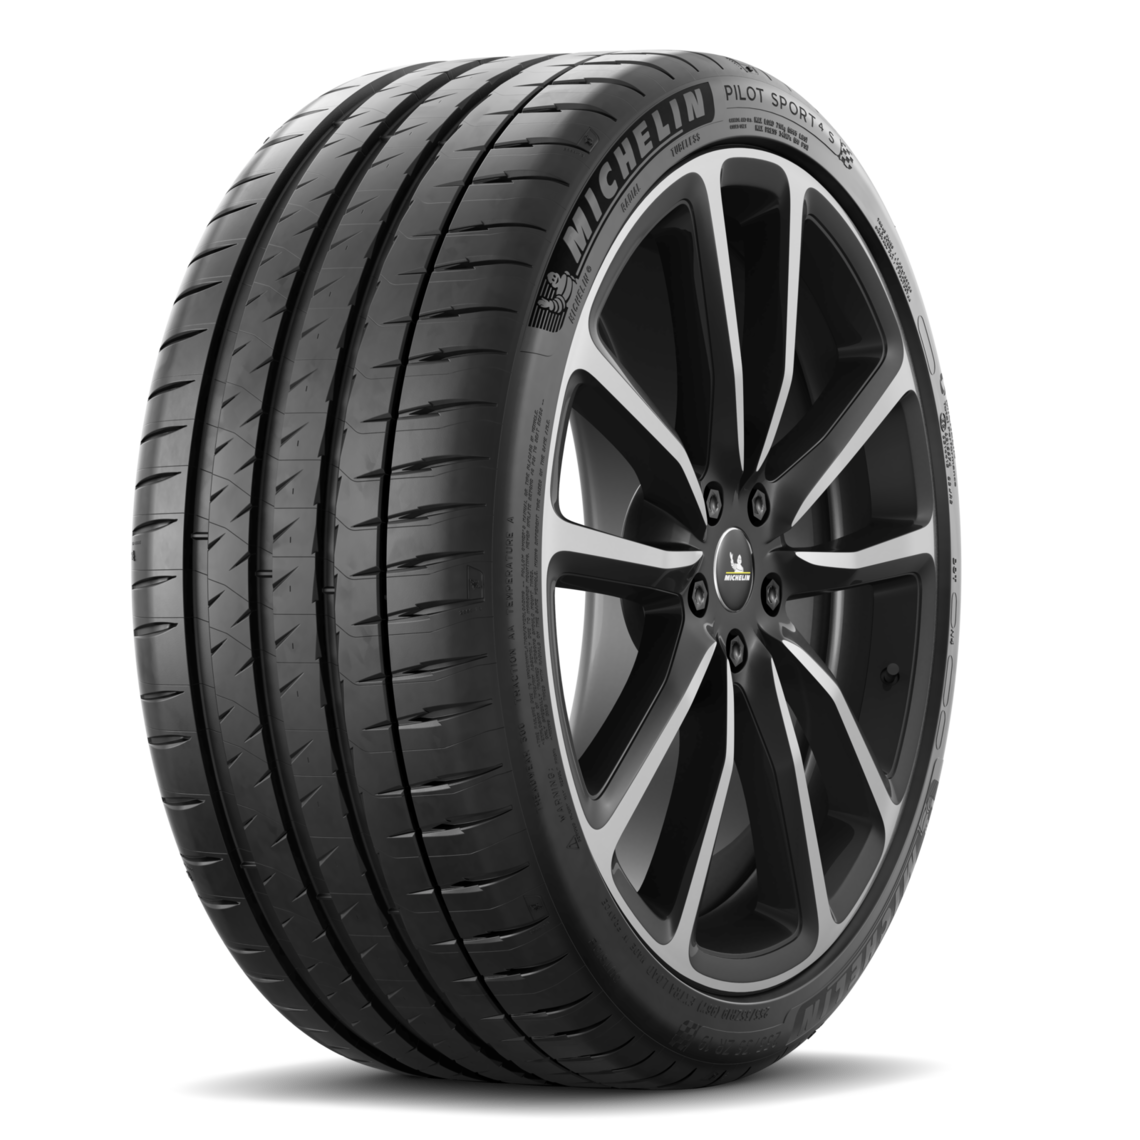 Michelin Pilot Sport 4 S - Tyre Reviews and